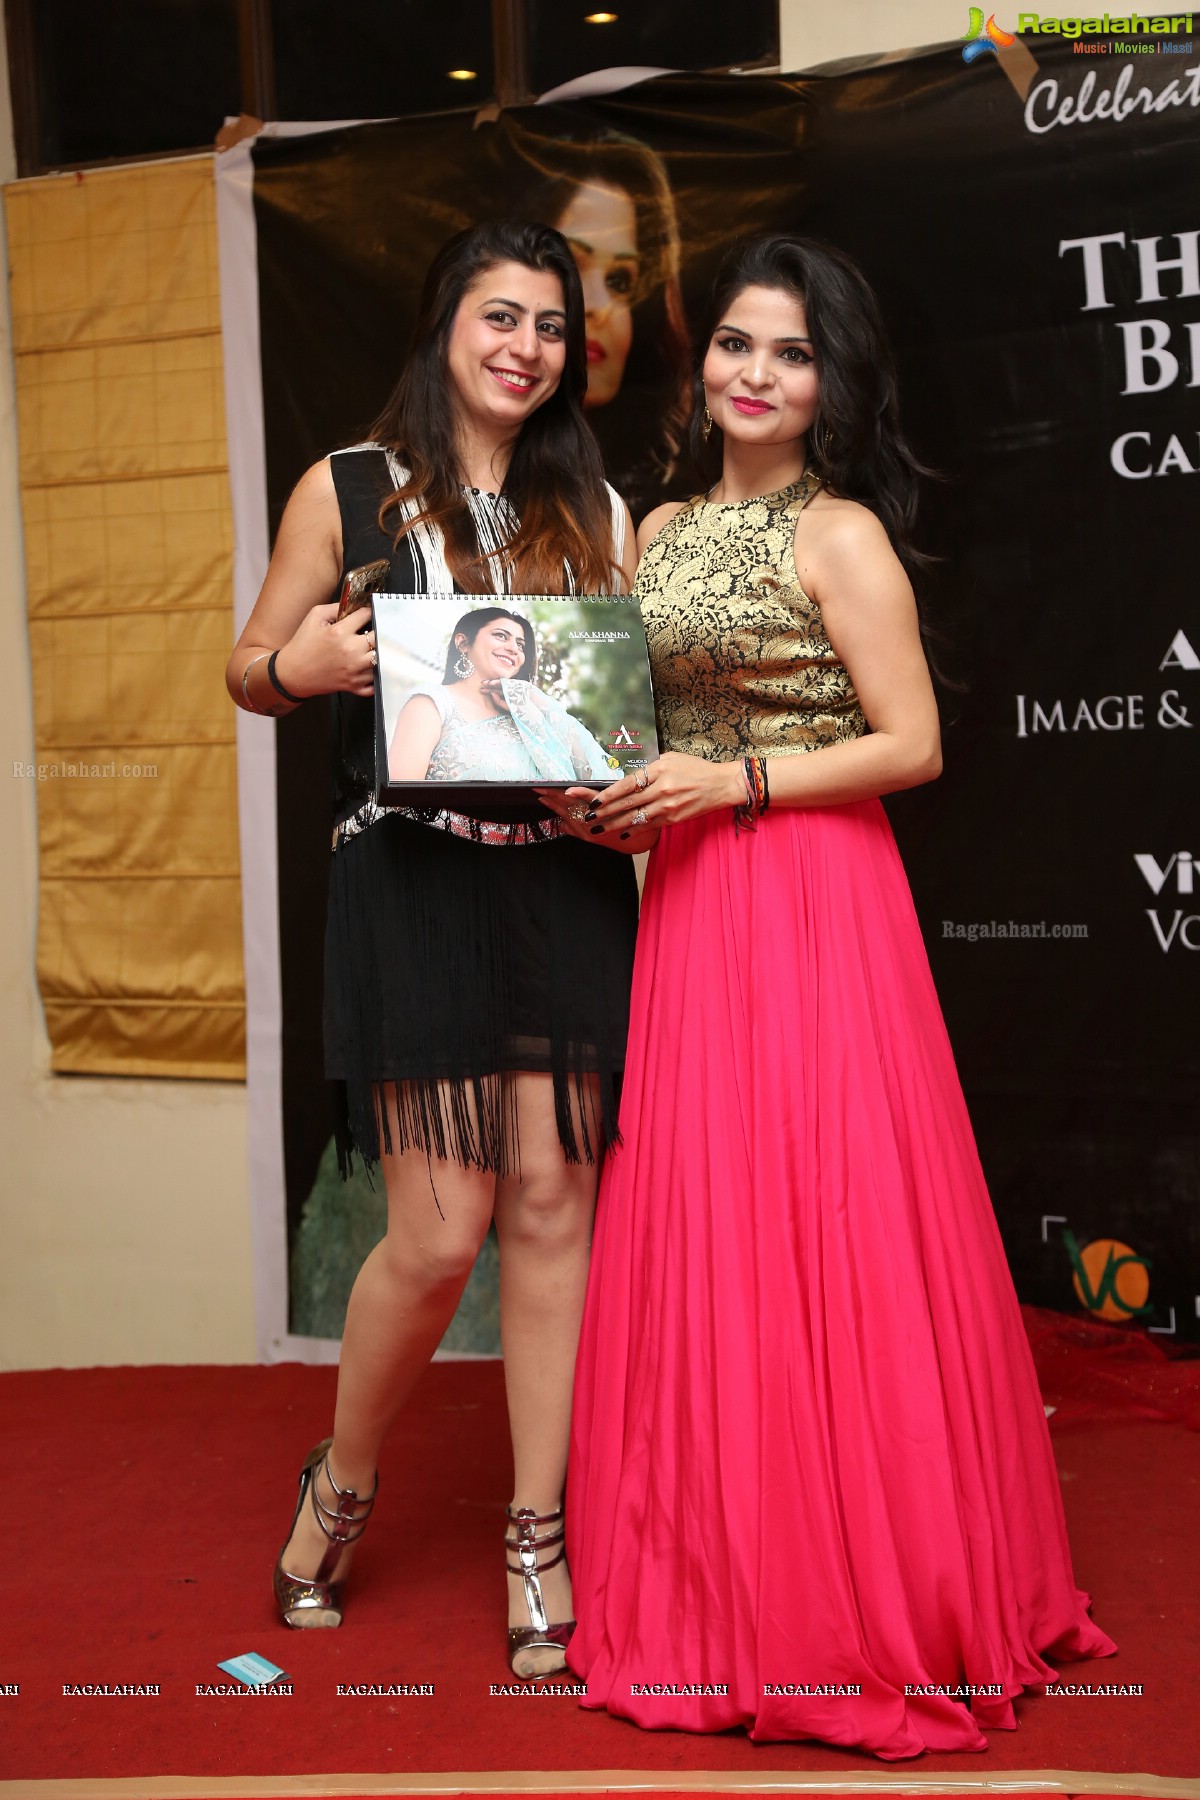 The Royal Bellezas 2017 Calender Launch at The Manohar Grand Fortune, Begumpet, Hyderabad